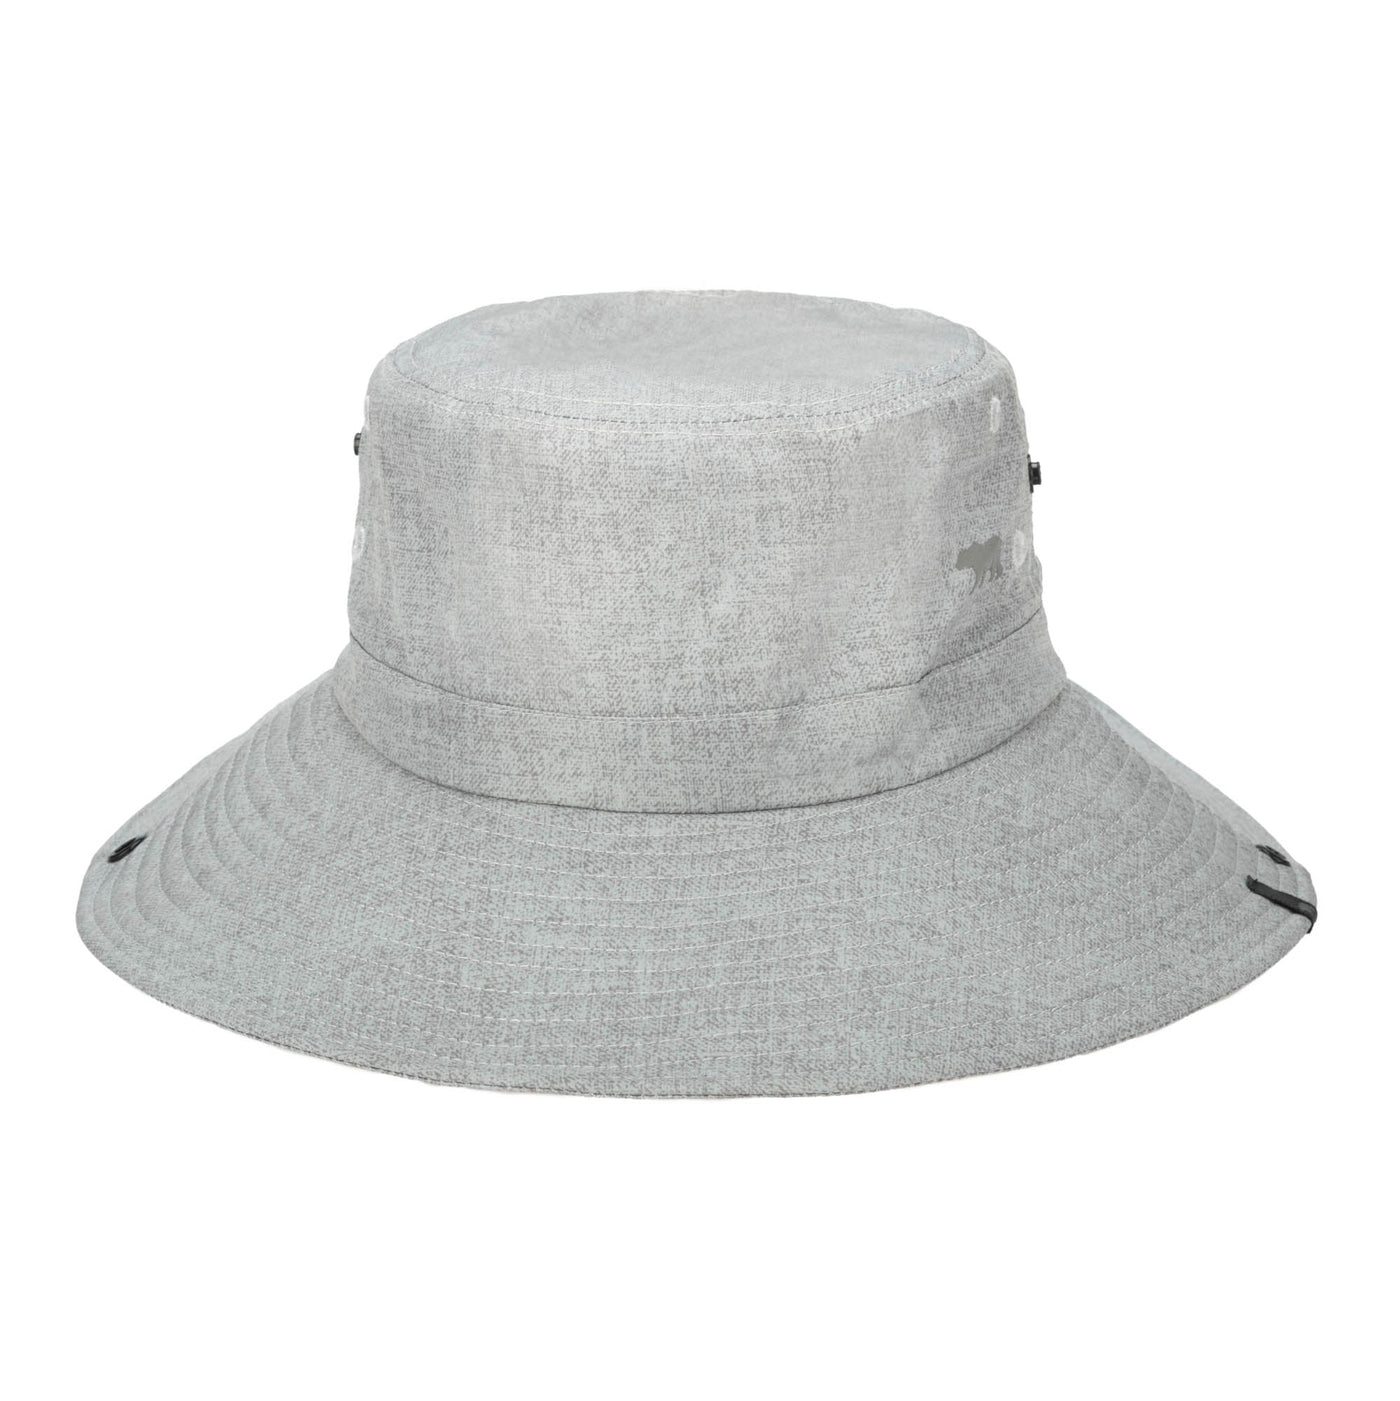 Chin Cord Hat Neck Hat with Adjustable Flap and Company – Outdoor Diego Boonie San